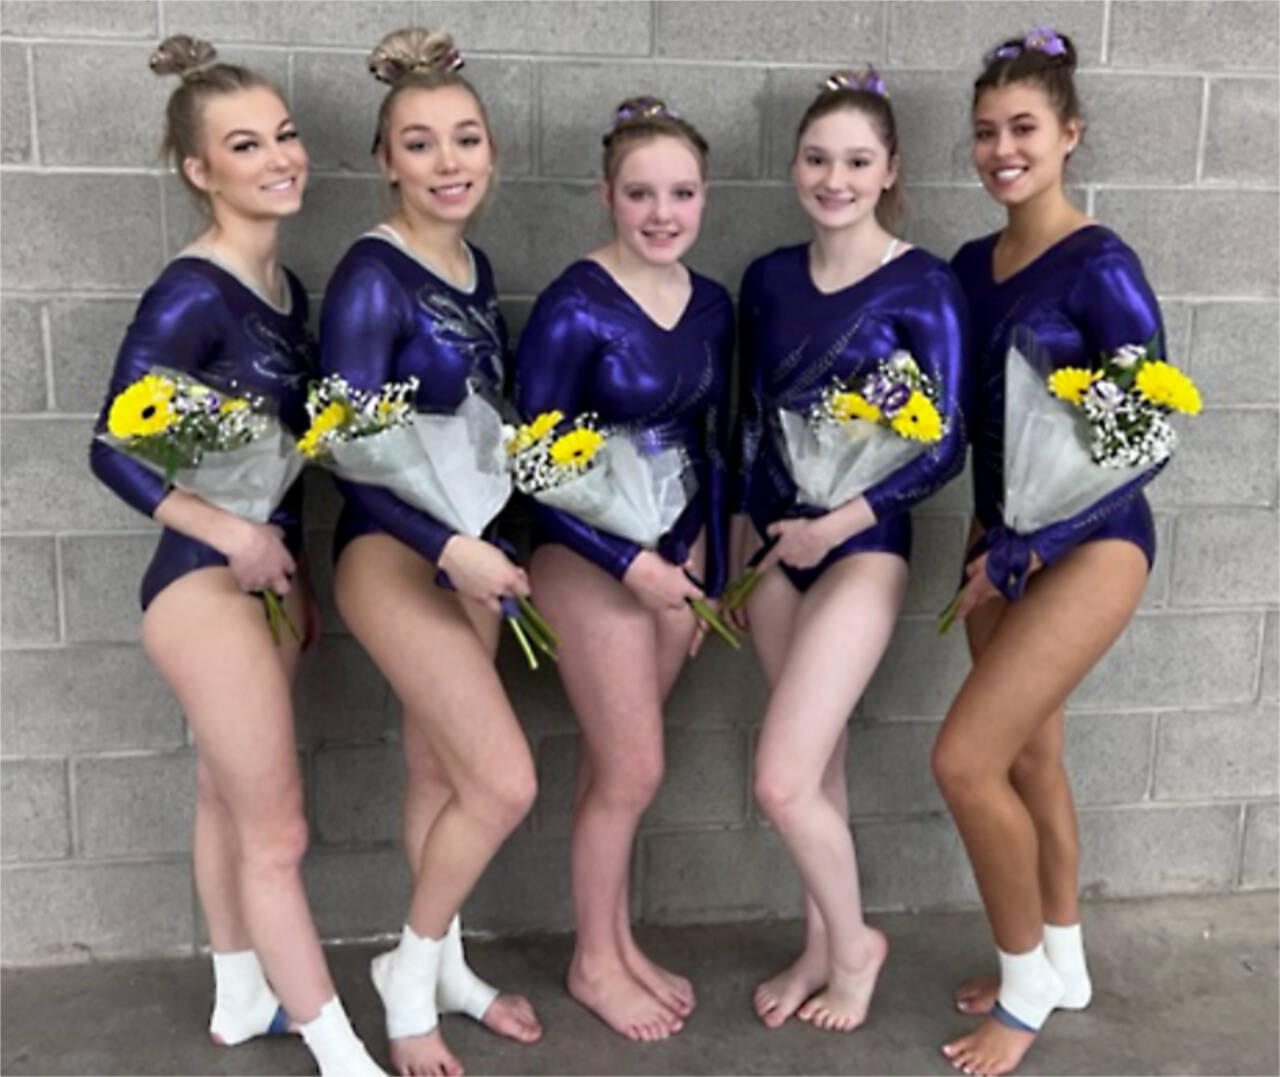 Sequim gymnasts, from left, Kori Miller, Susannah Sharp, Lucy Spelker, Madison Ripley and Amara Brown. Miller, Sharp and Spelker will be competing at the state gymnastics meet that begins Thursday. (Courtesy photo)